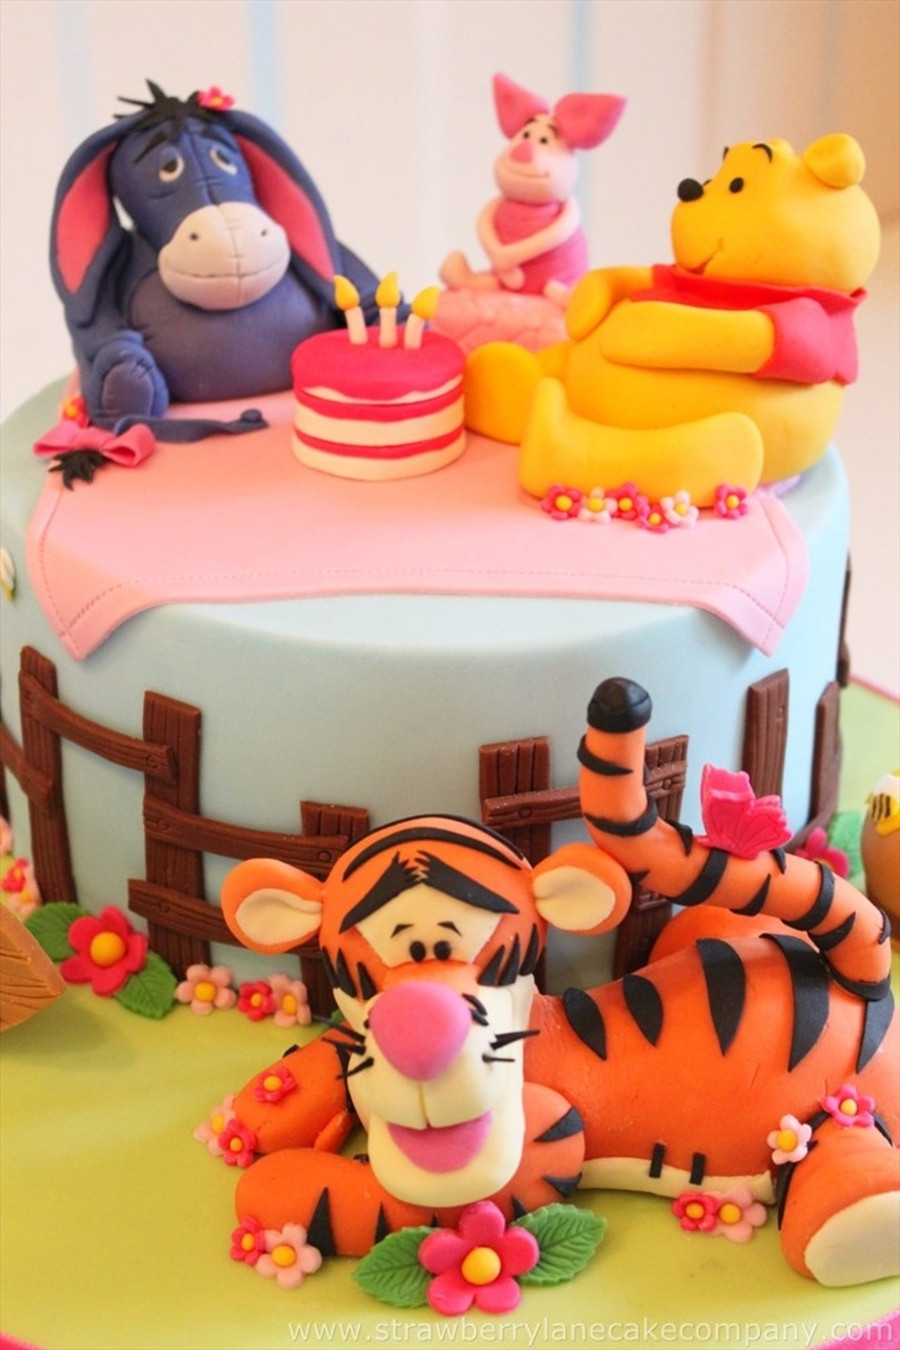 Winnie The Pooh Birthday Cakes
 Winnie The Pooh And Friends Birthday Picnic CakeCentral